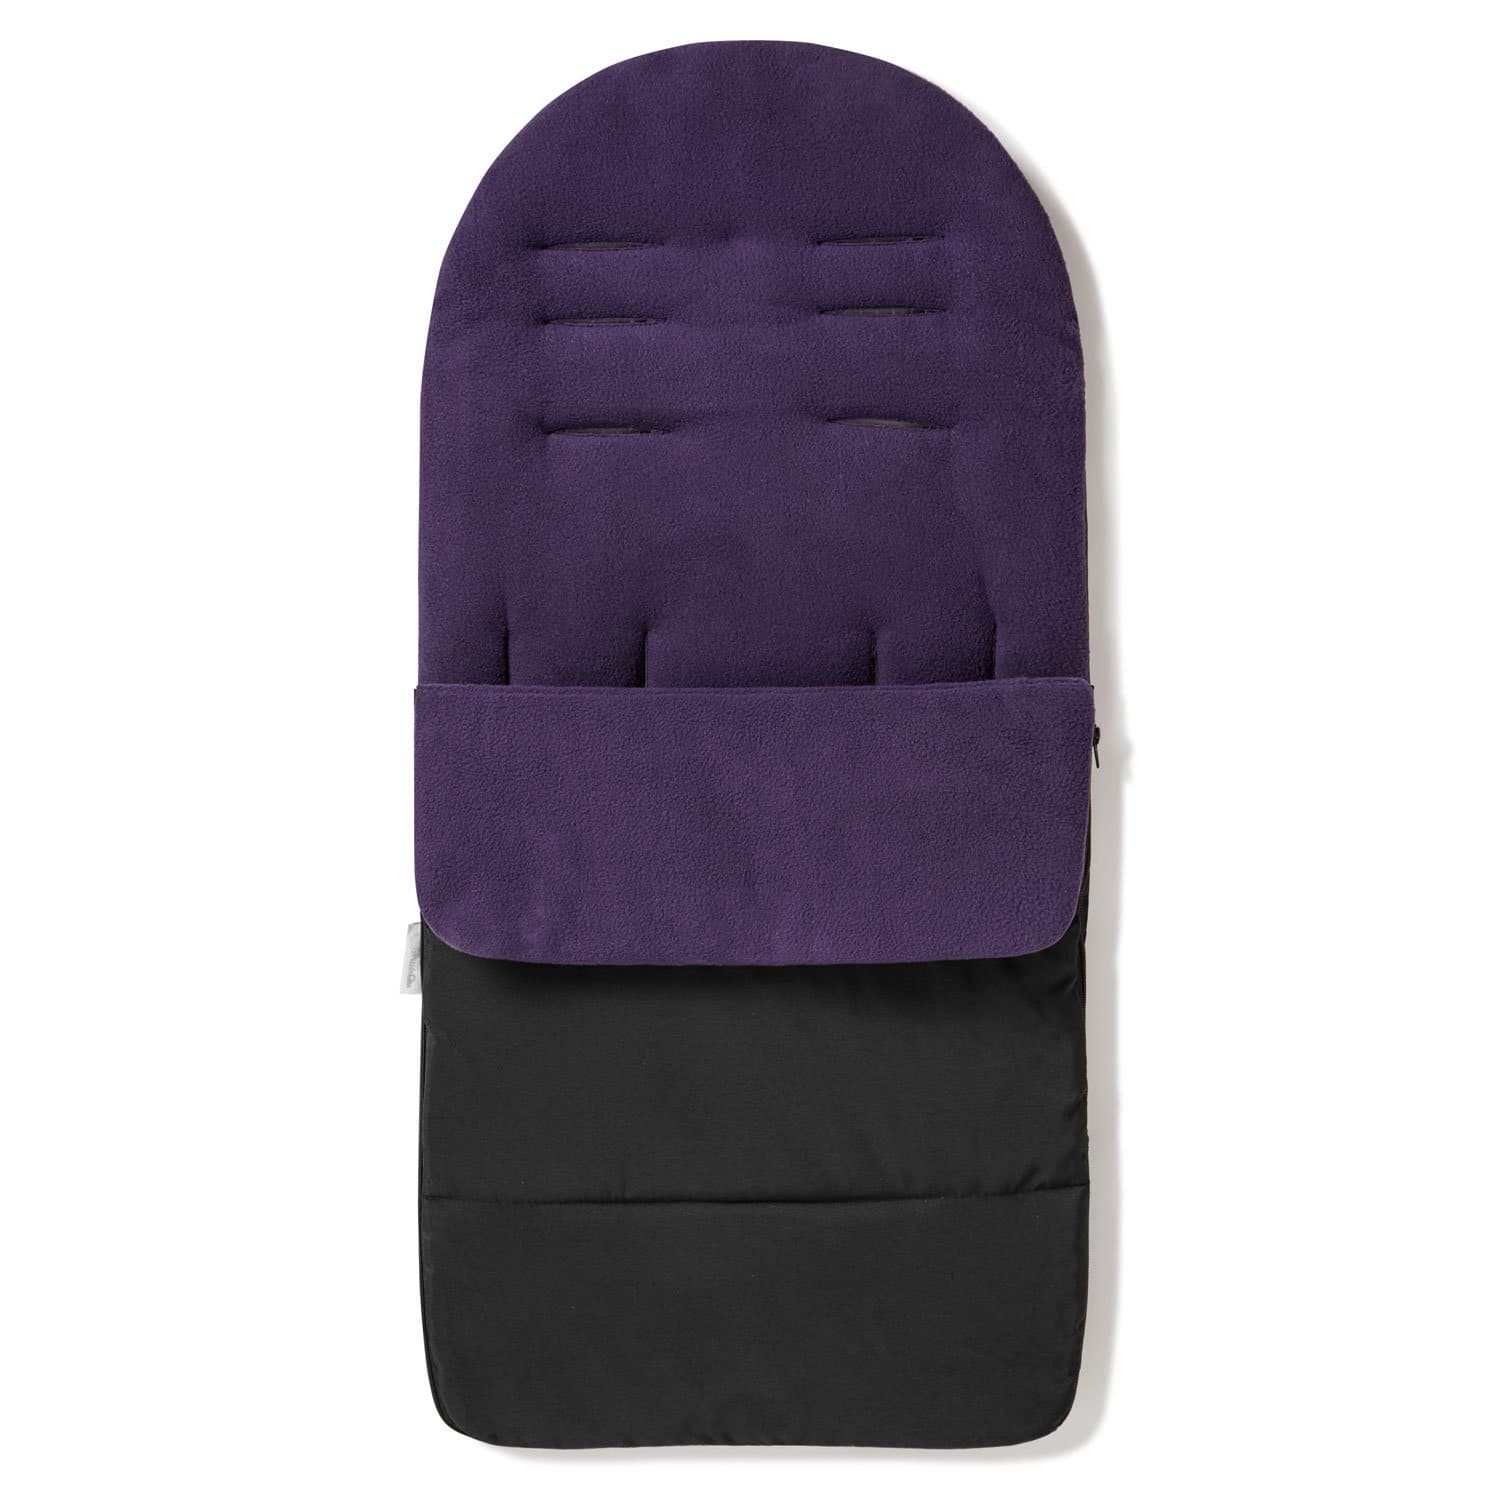 Premium Footmuff / Cosy Toes Compatible with Tutti Bambini - Plum Purple / Fits All Models | For Your Little One